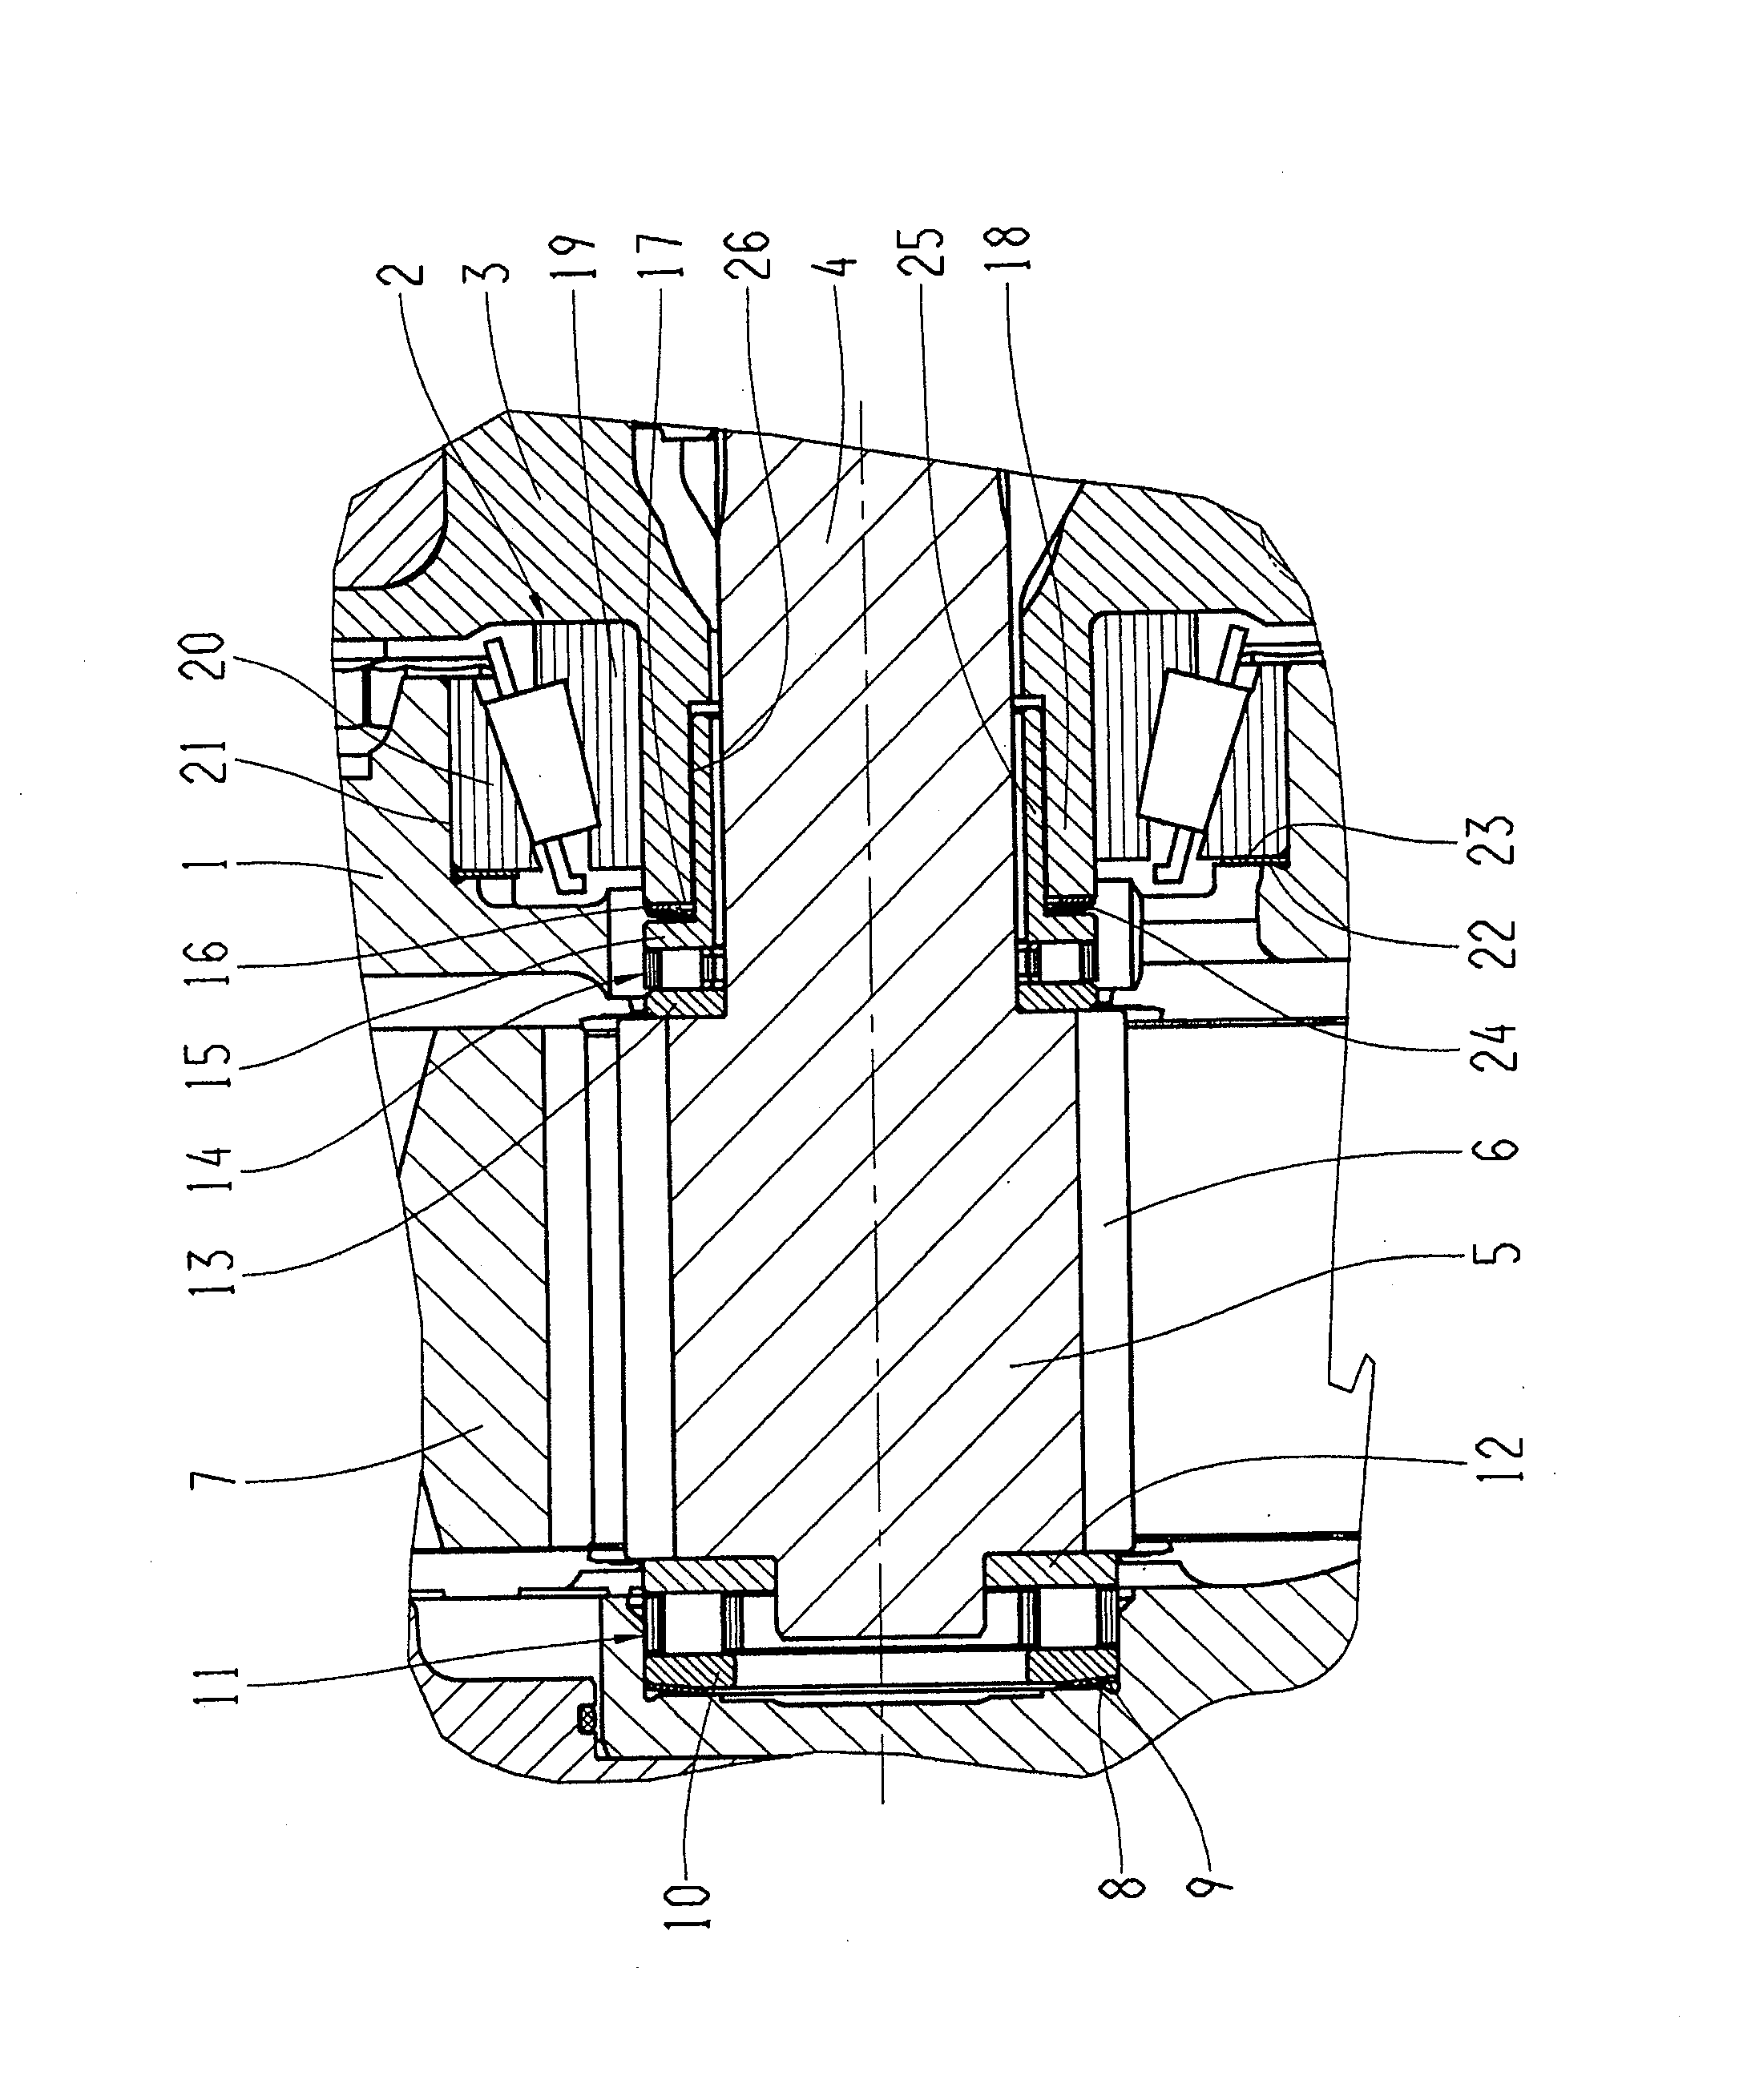 Drive device for the road wheels of a vehicle